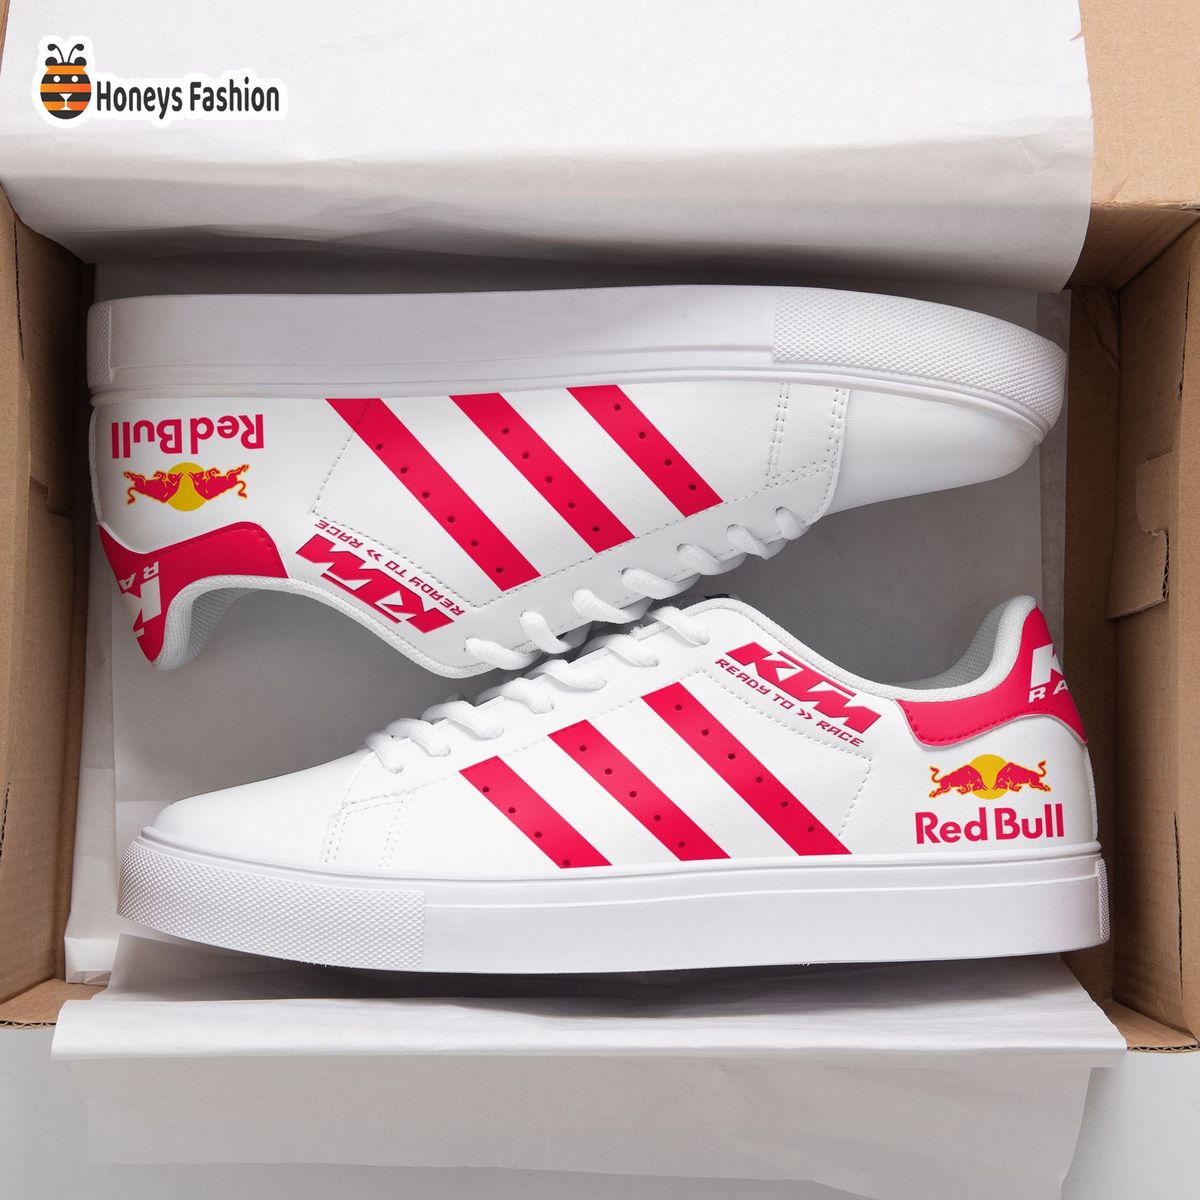 KTM Racing Stan Smith Skate Shoes